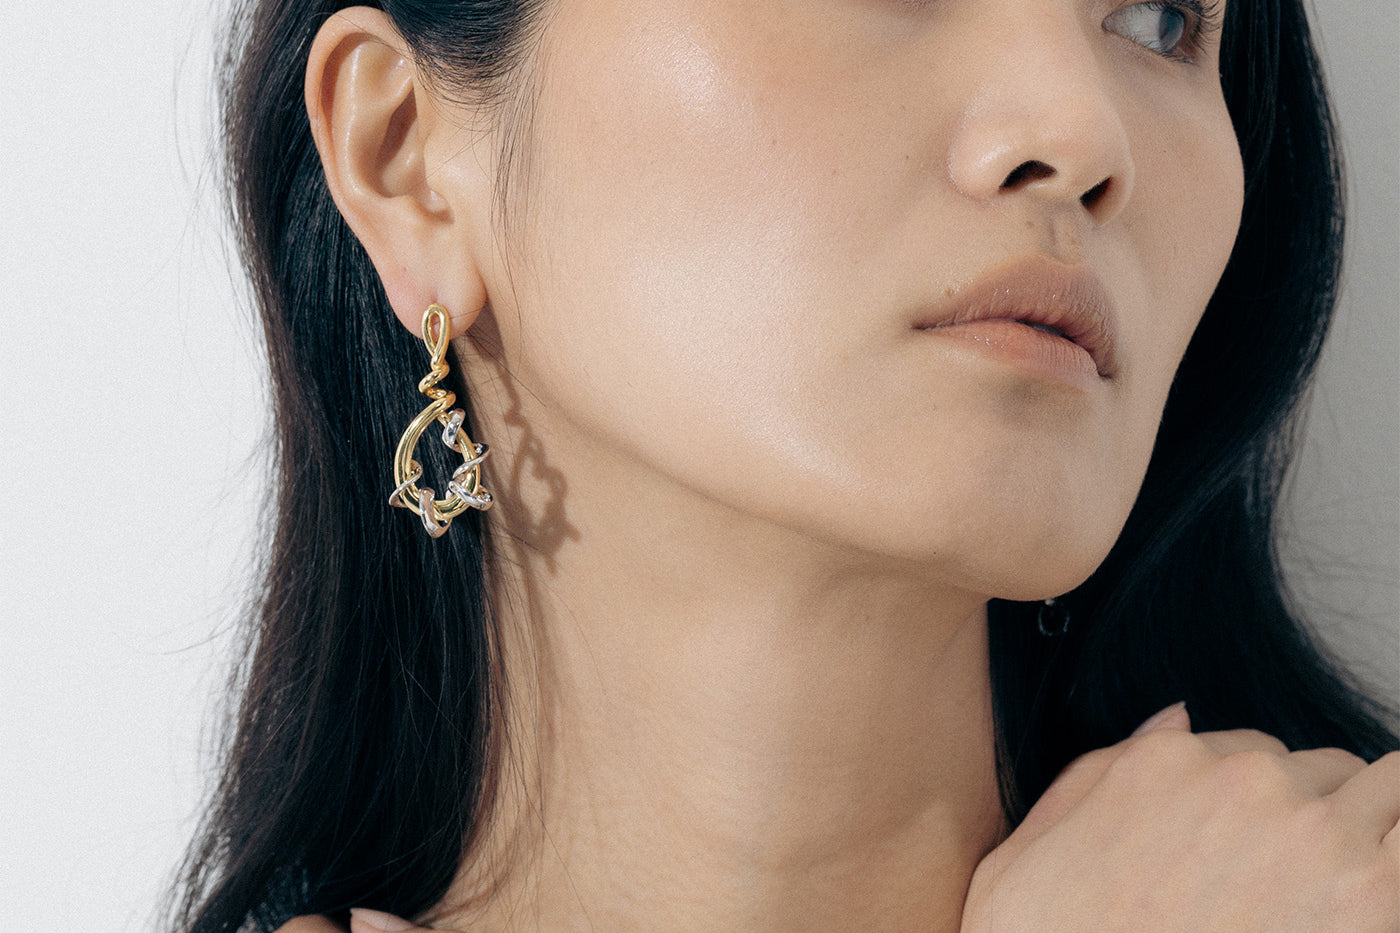 Yellow Gold twisted drop shaped Earrings with white gold wrapped and twisted around it - Model shot